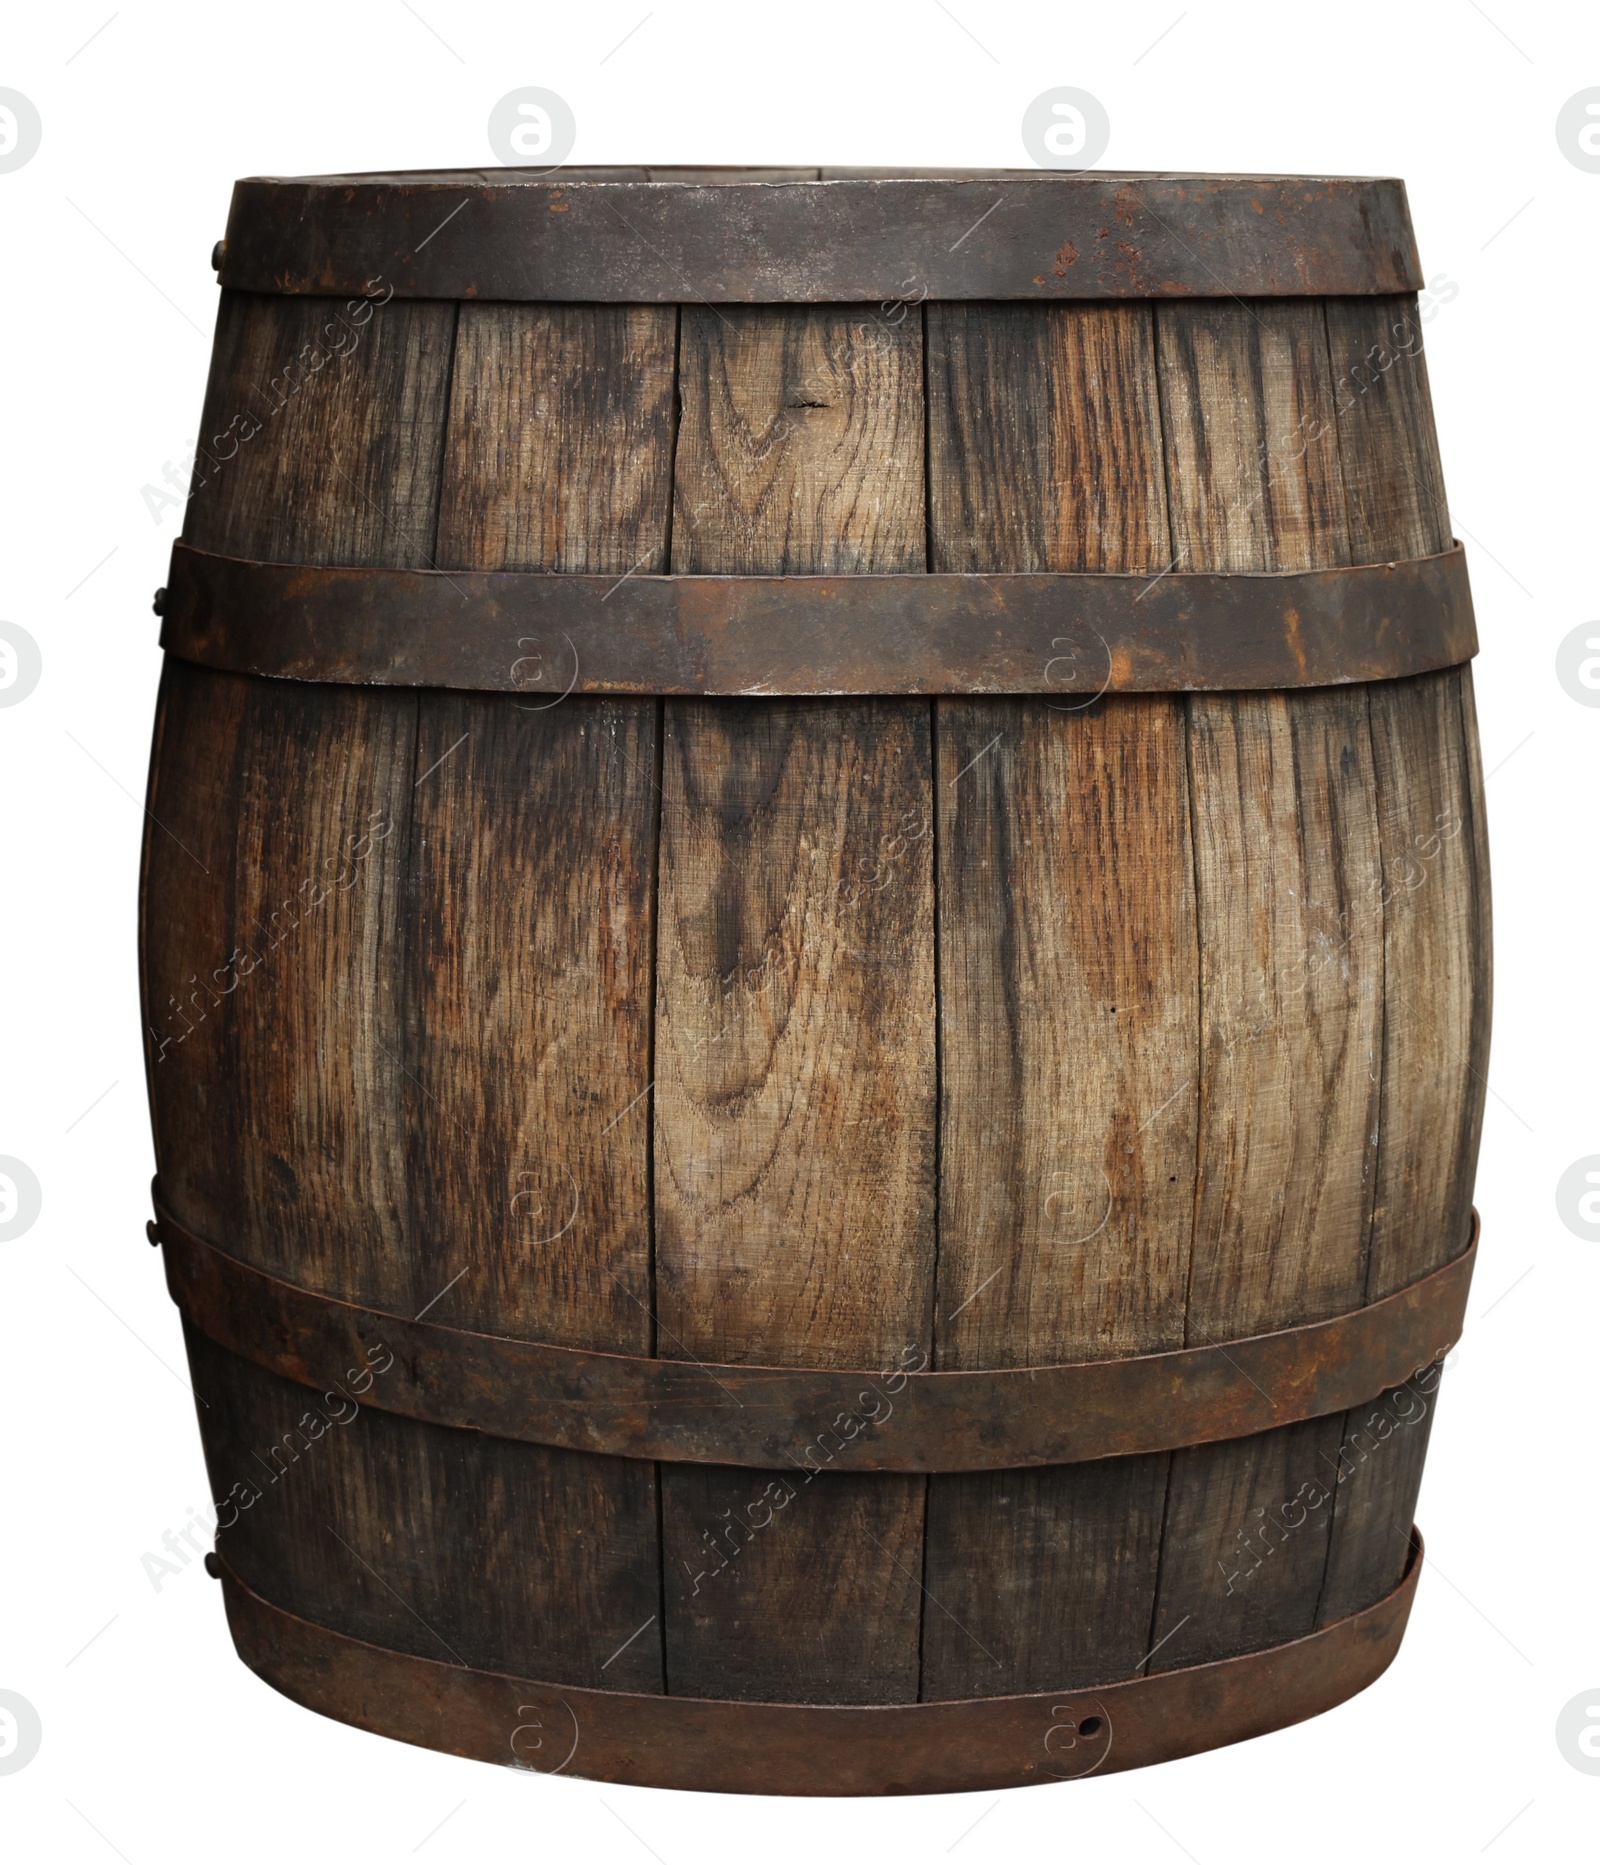 Image of One wooden barrel with metal hoops isolated on white